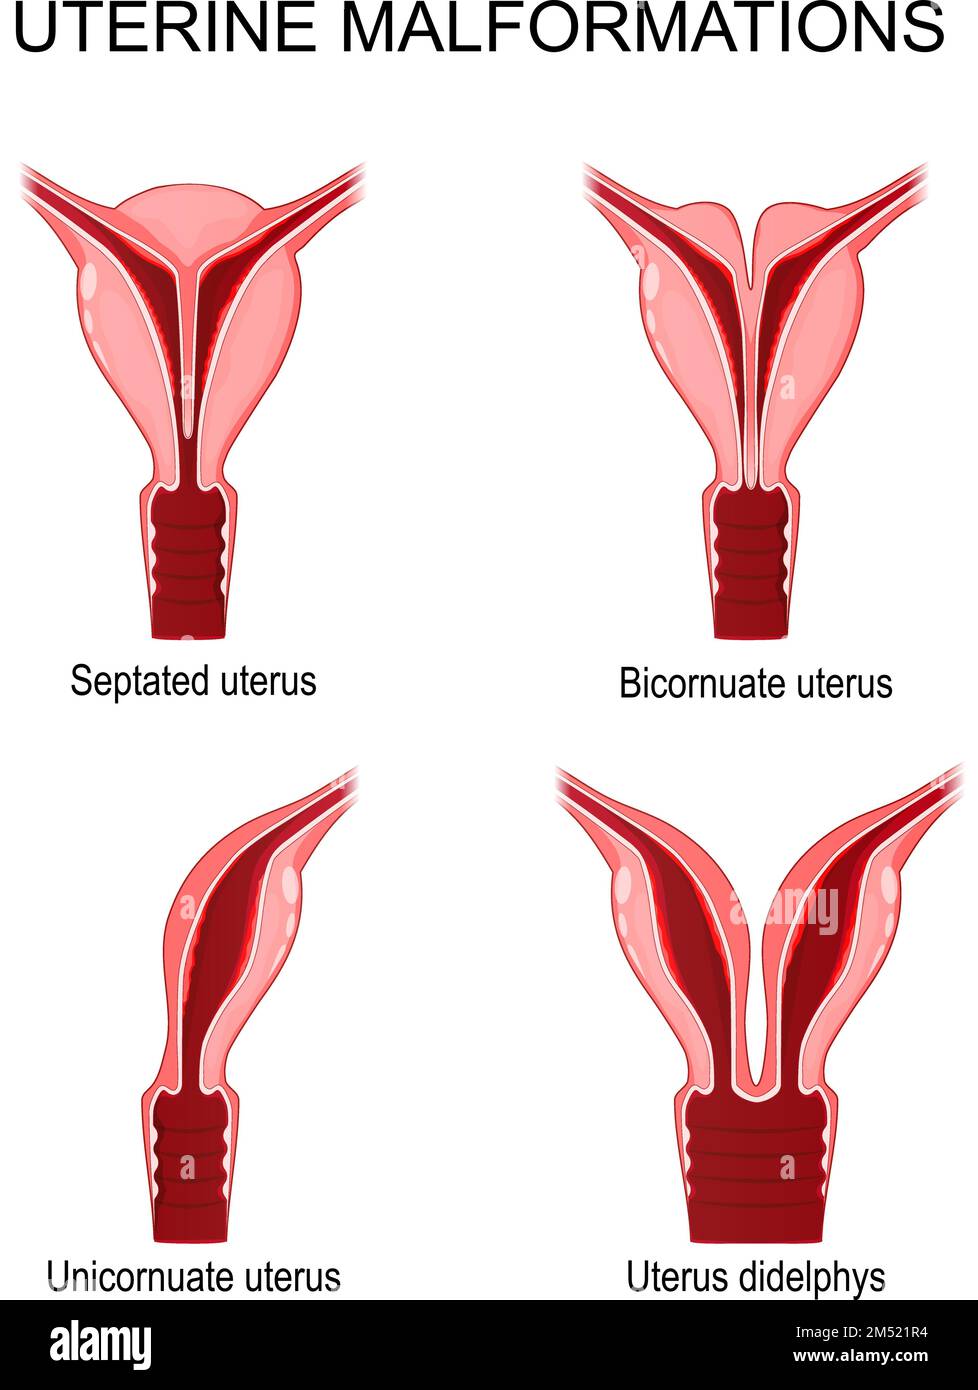 uterine malformations. Unicornuate, didelphys, Bicornuate, and Septated uterus. Vector poster for medical use Stock Vector